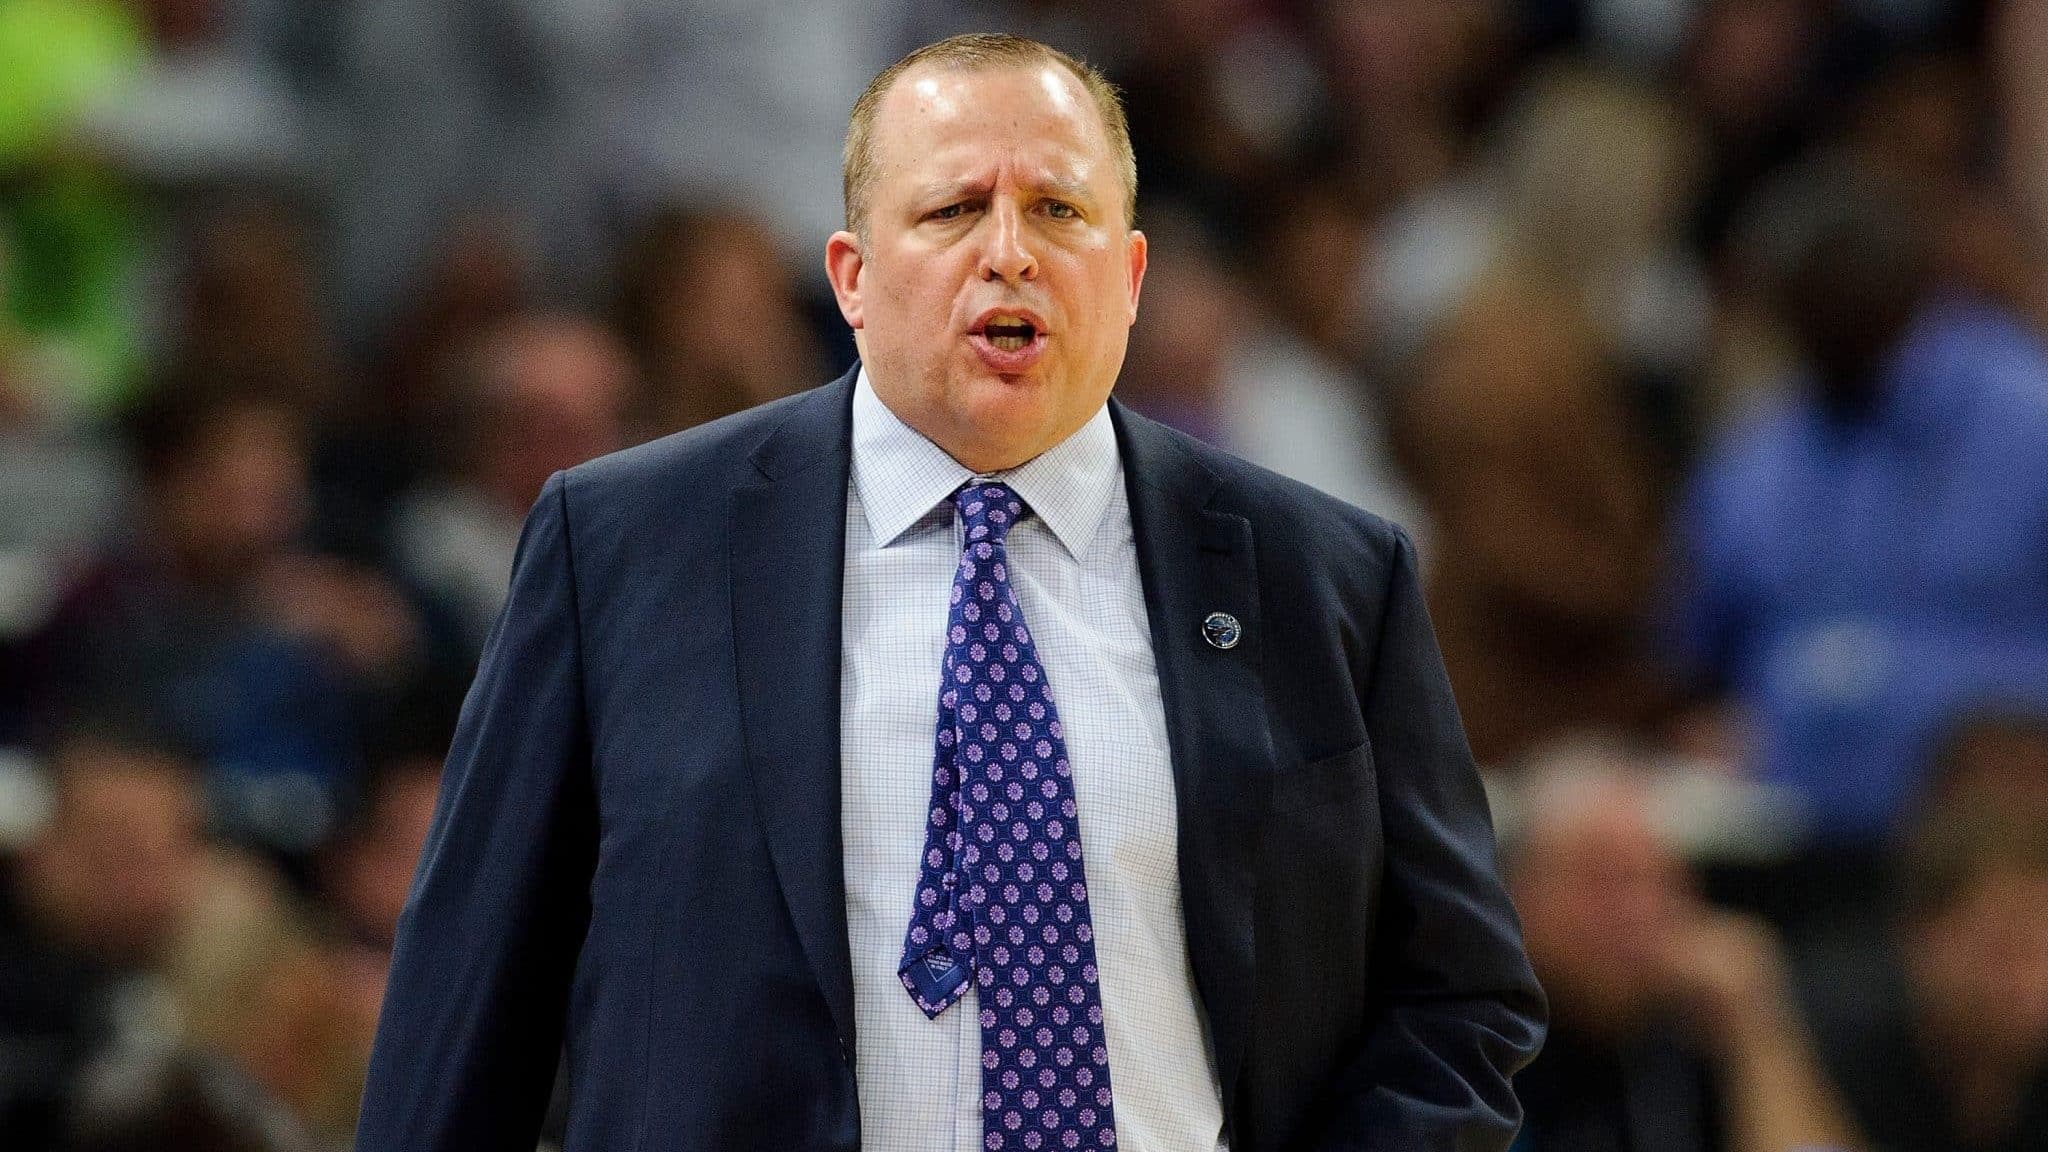 MINNEAPOLIS, MN - OCTOBER 20: Head coach Tom Thibodeau of the Minnesota Timberwolves looks on during the game against the Utah Jazz on October 20, 2017 at the Target Center in Minneapolis, Minnesota. The Timberwolves defeated the Jazz 100-97. NOTE TO USER: User expressly acknowledges and agrees that, by downloading and or using this Photograph, user is consenting to the terms and conditions of the Getty Images License Agreement.